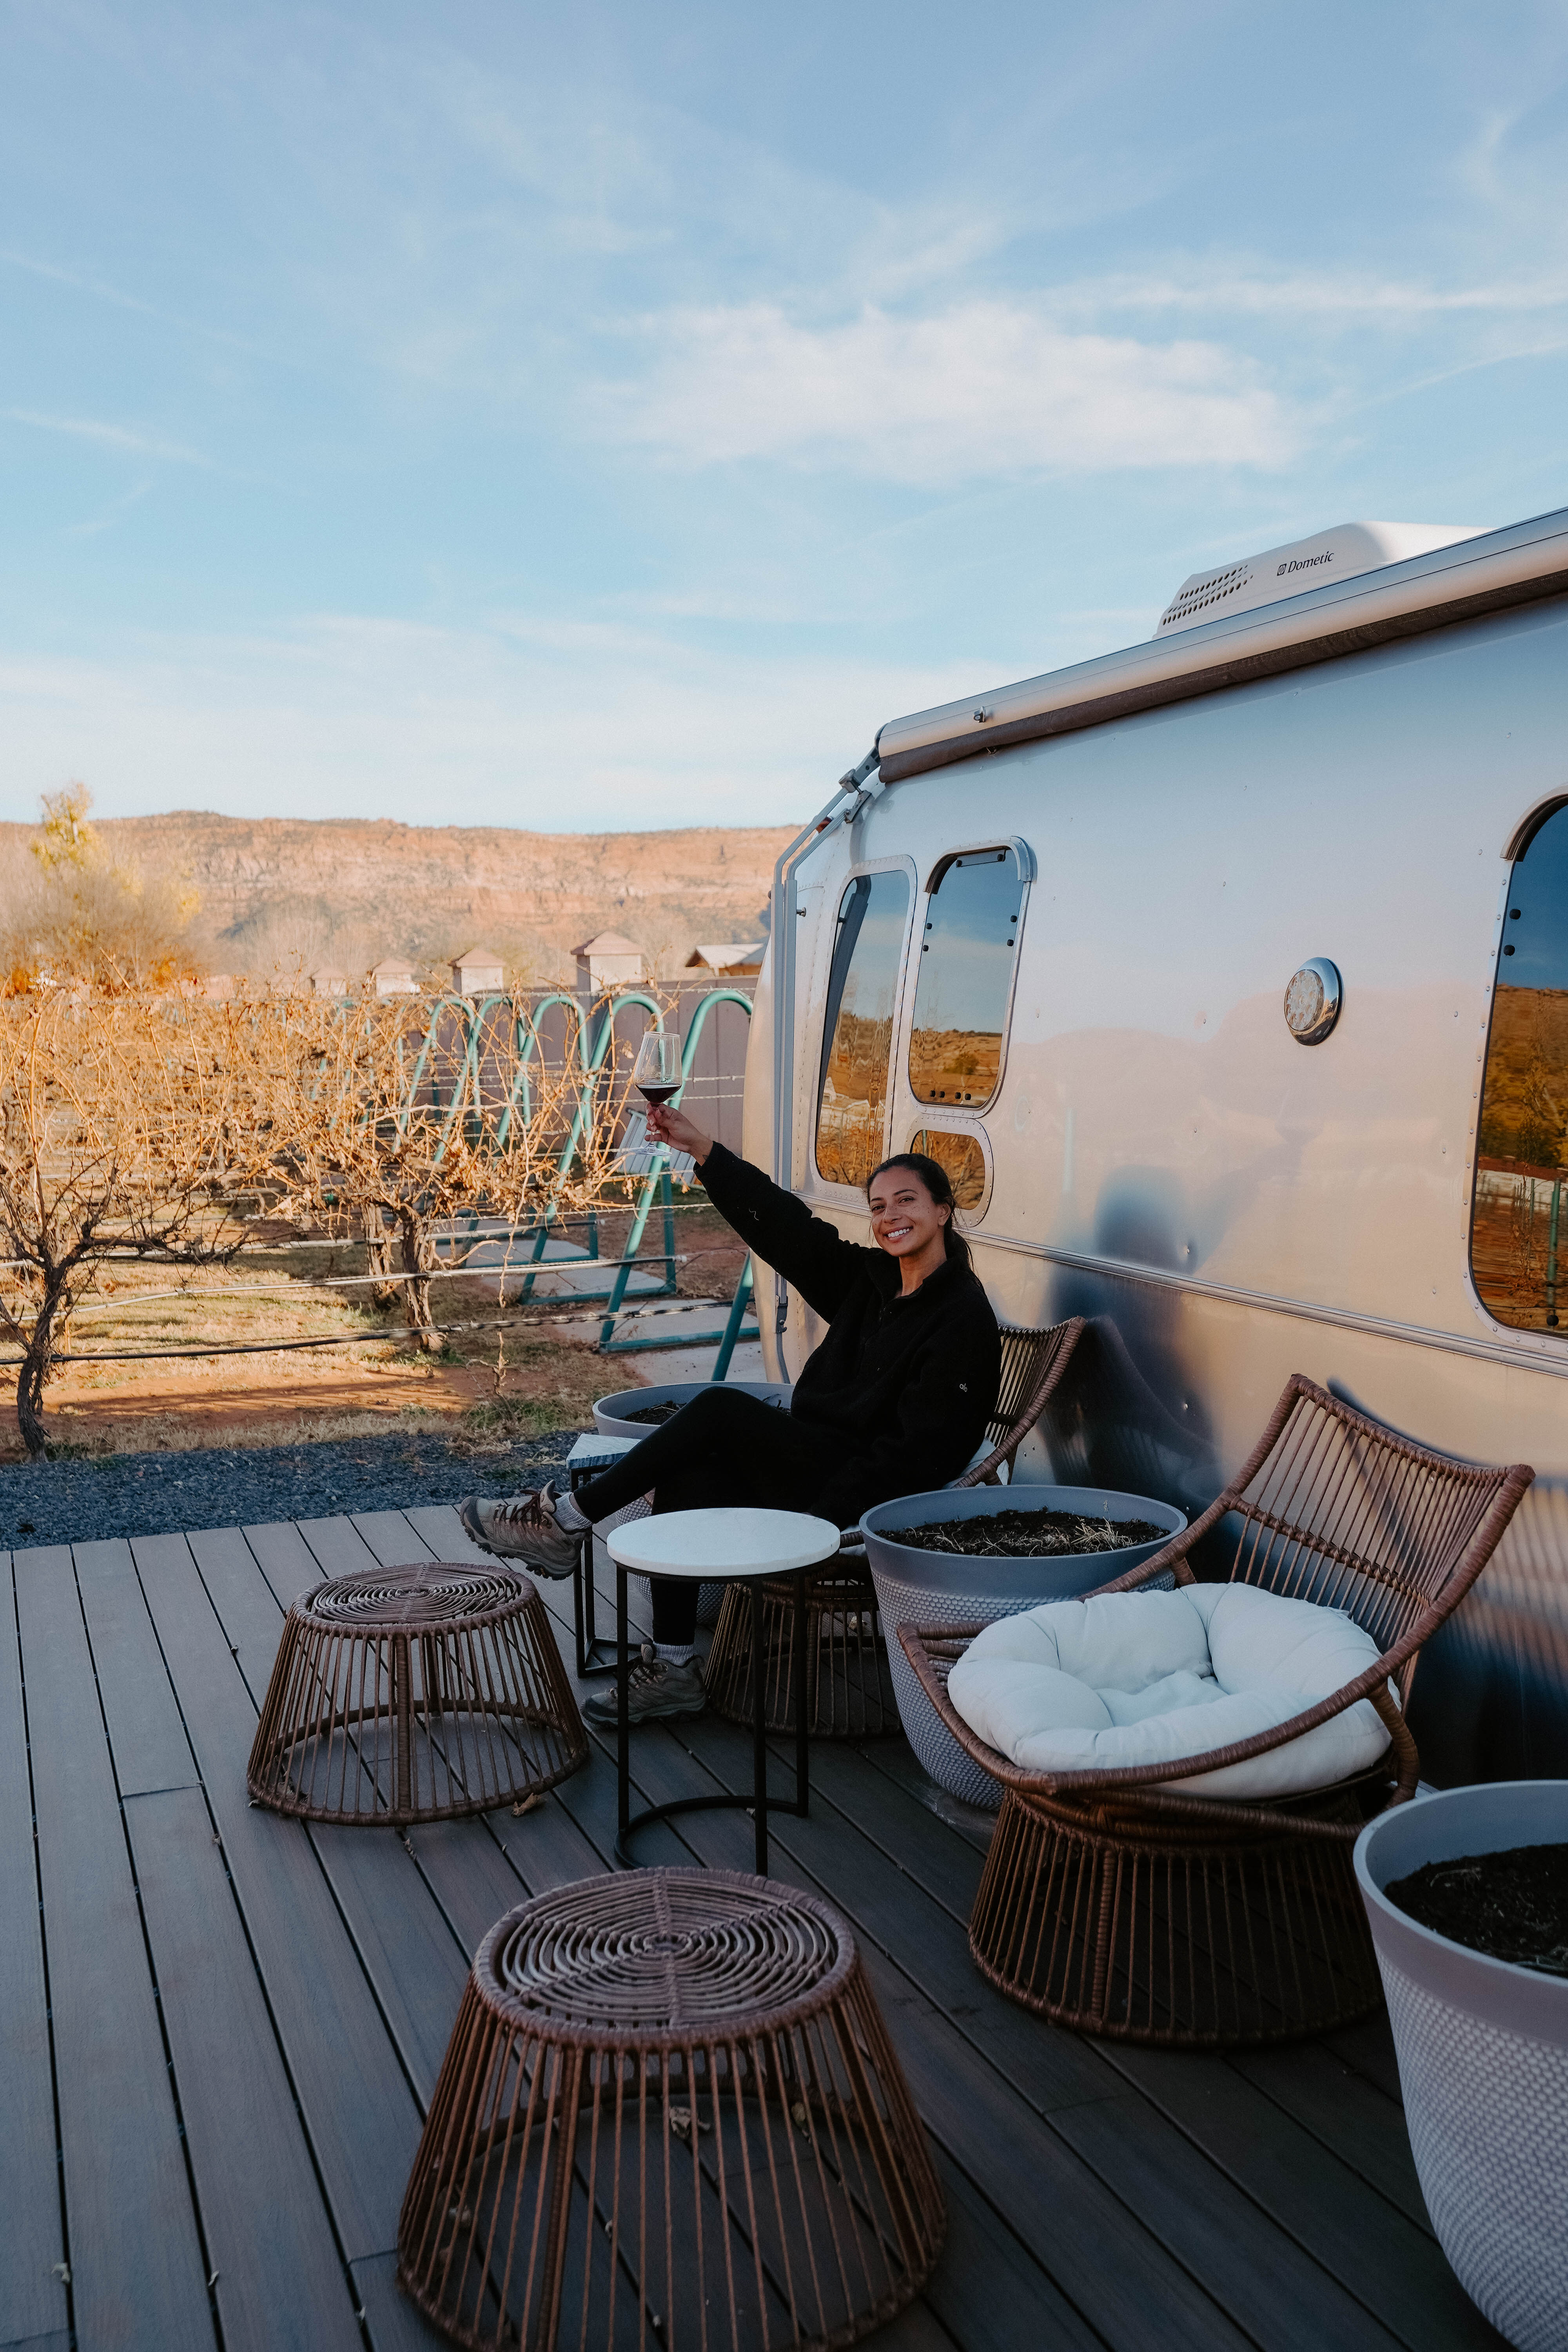 Winery in Zion with an airstream